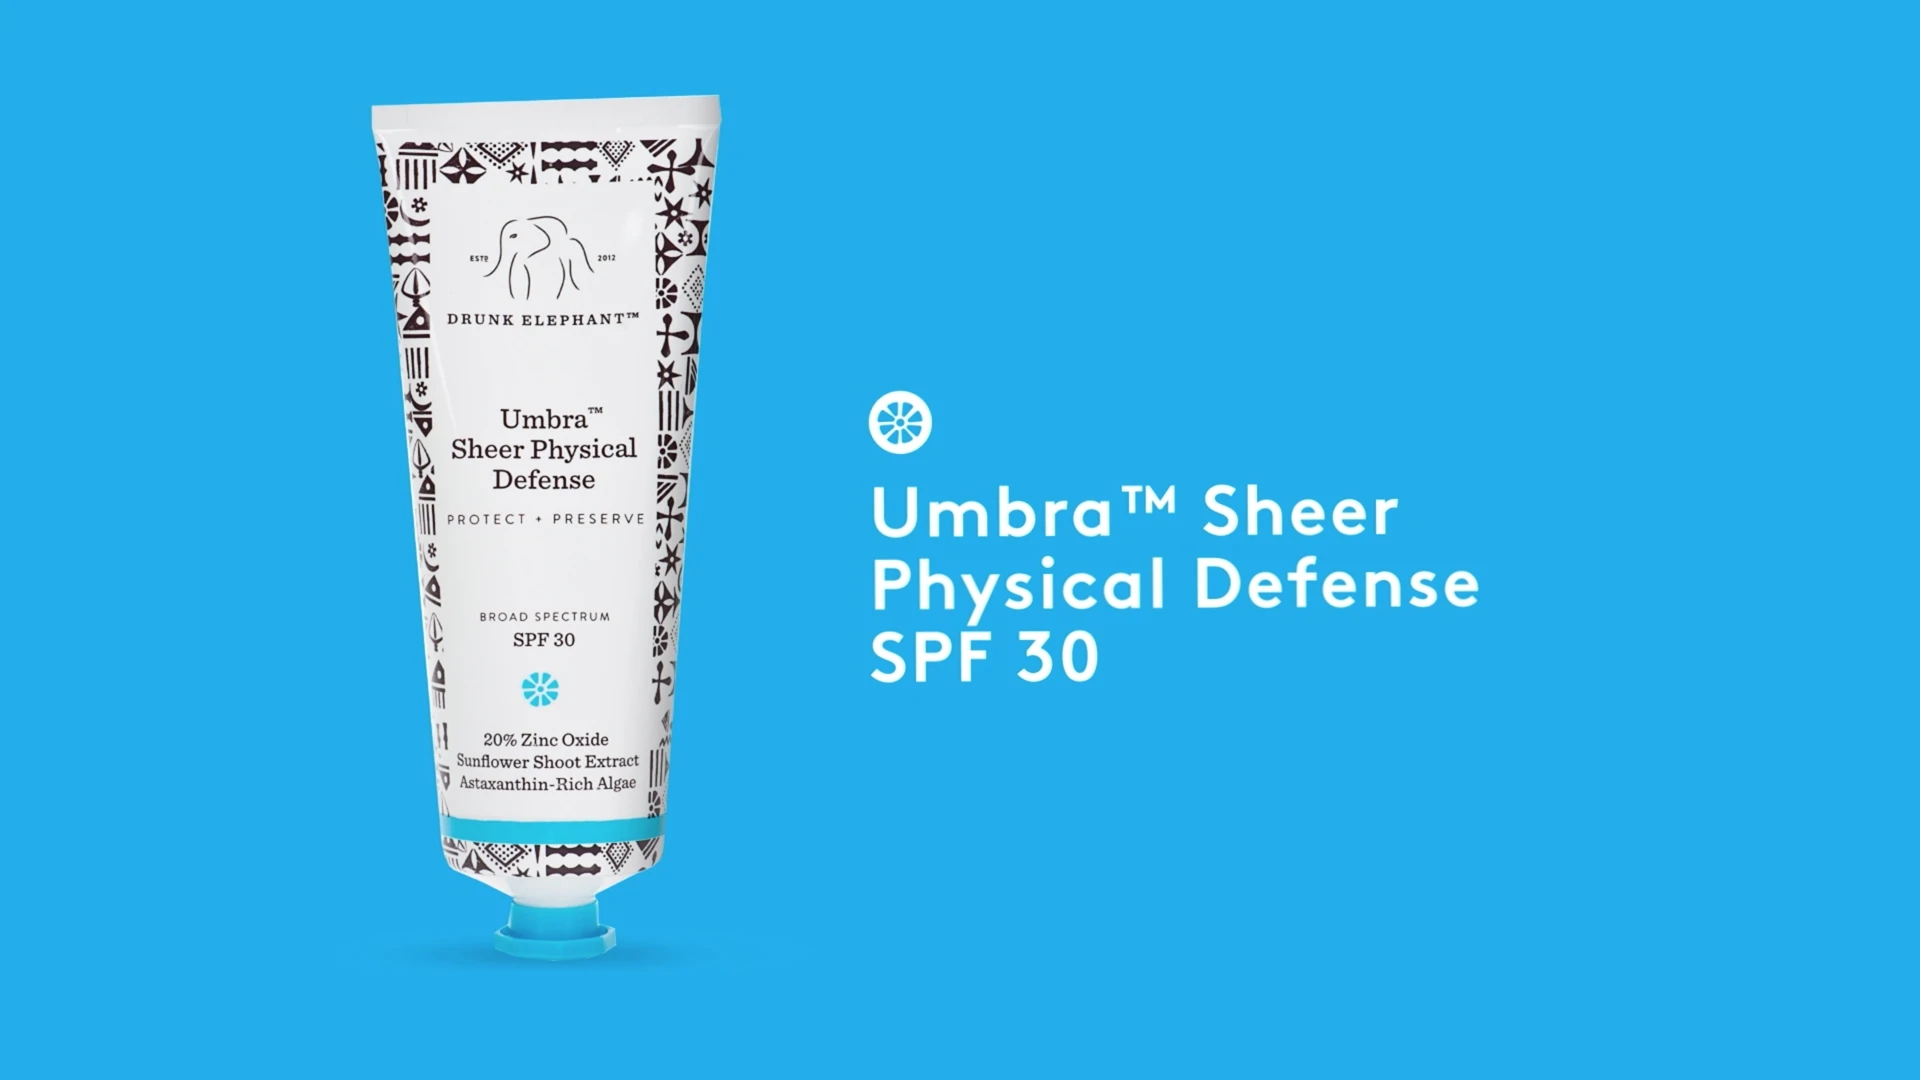 video detailing the benefits of Umbra Sheer Physical Defense SPF 30